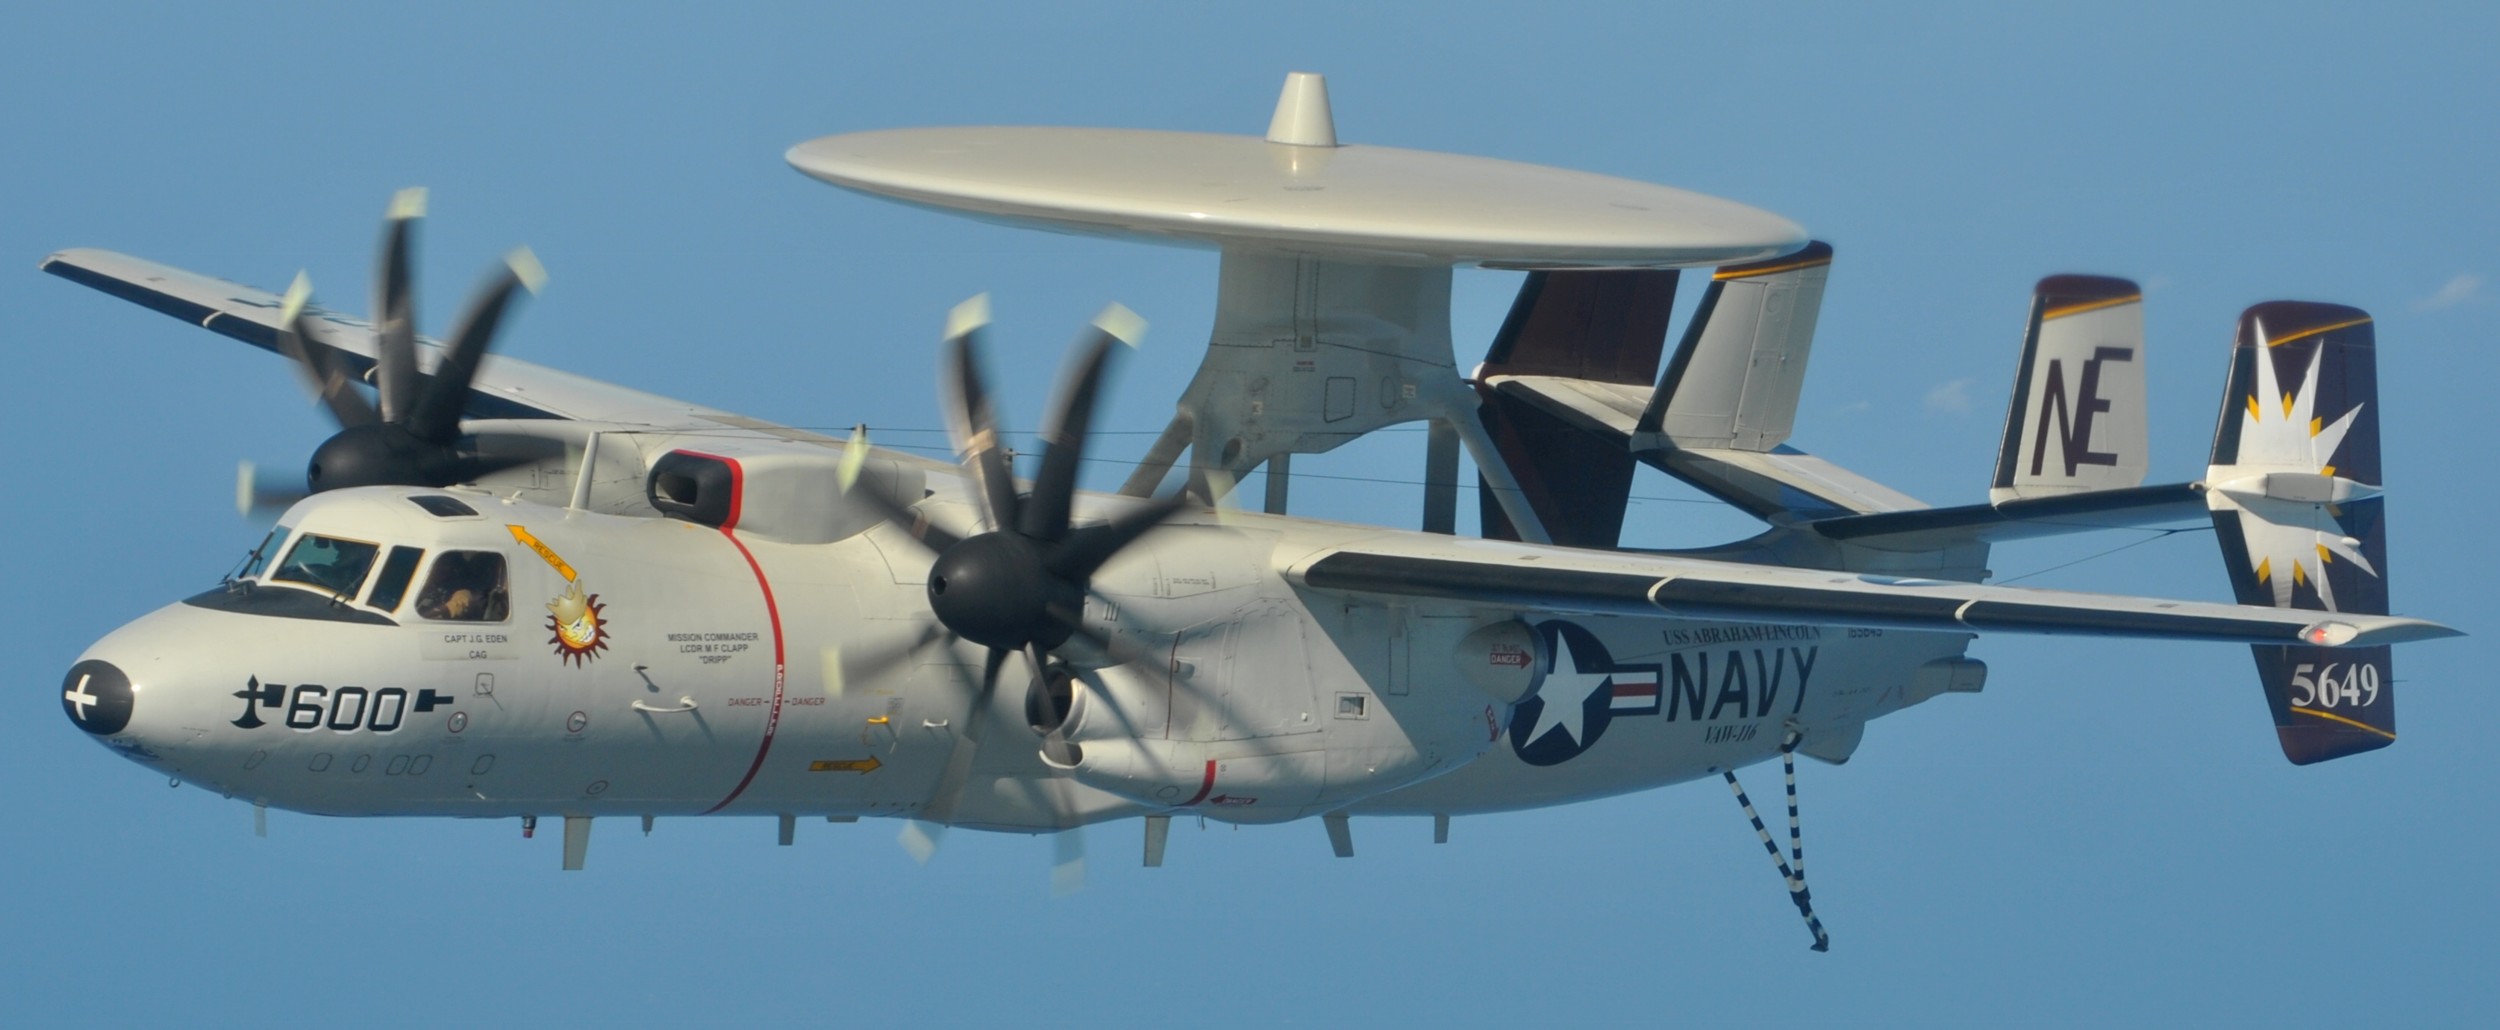 vaw-116 sun kings airborne command control squadron carrier early warning cvw-2 uss abraham lincoln cvn-72 20